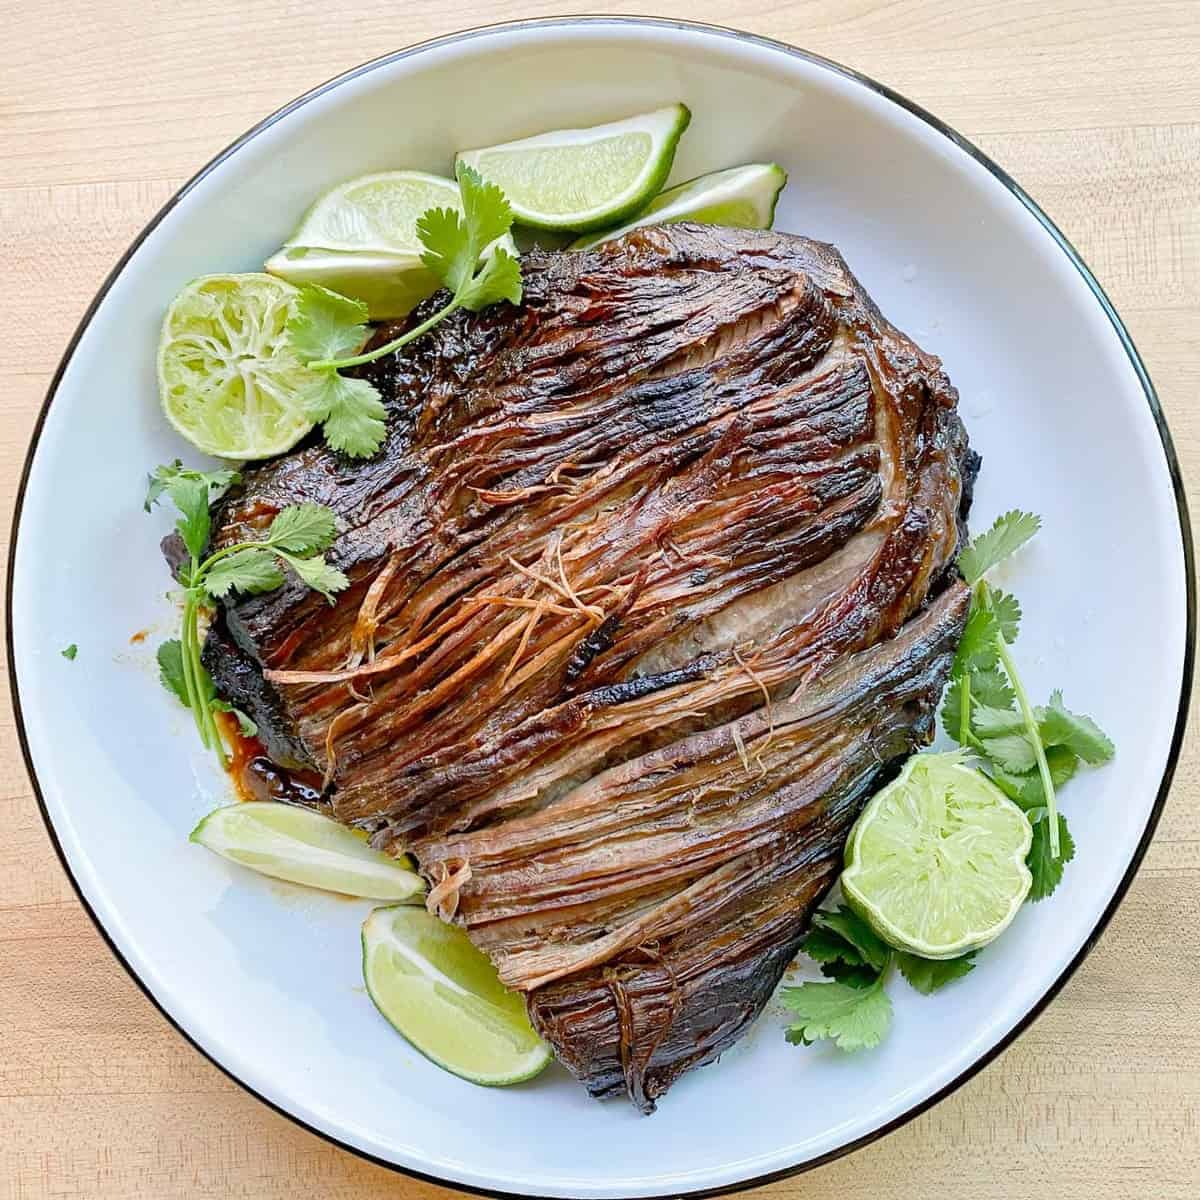 shredded beef taco recipe served with fresh limes